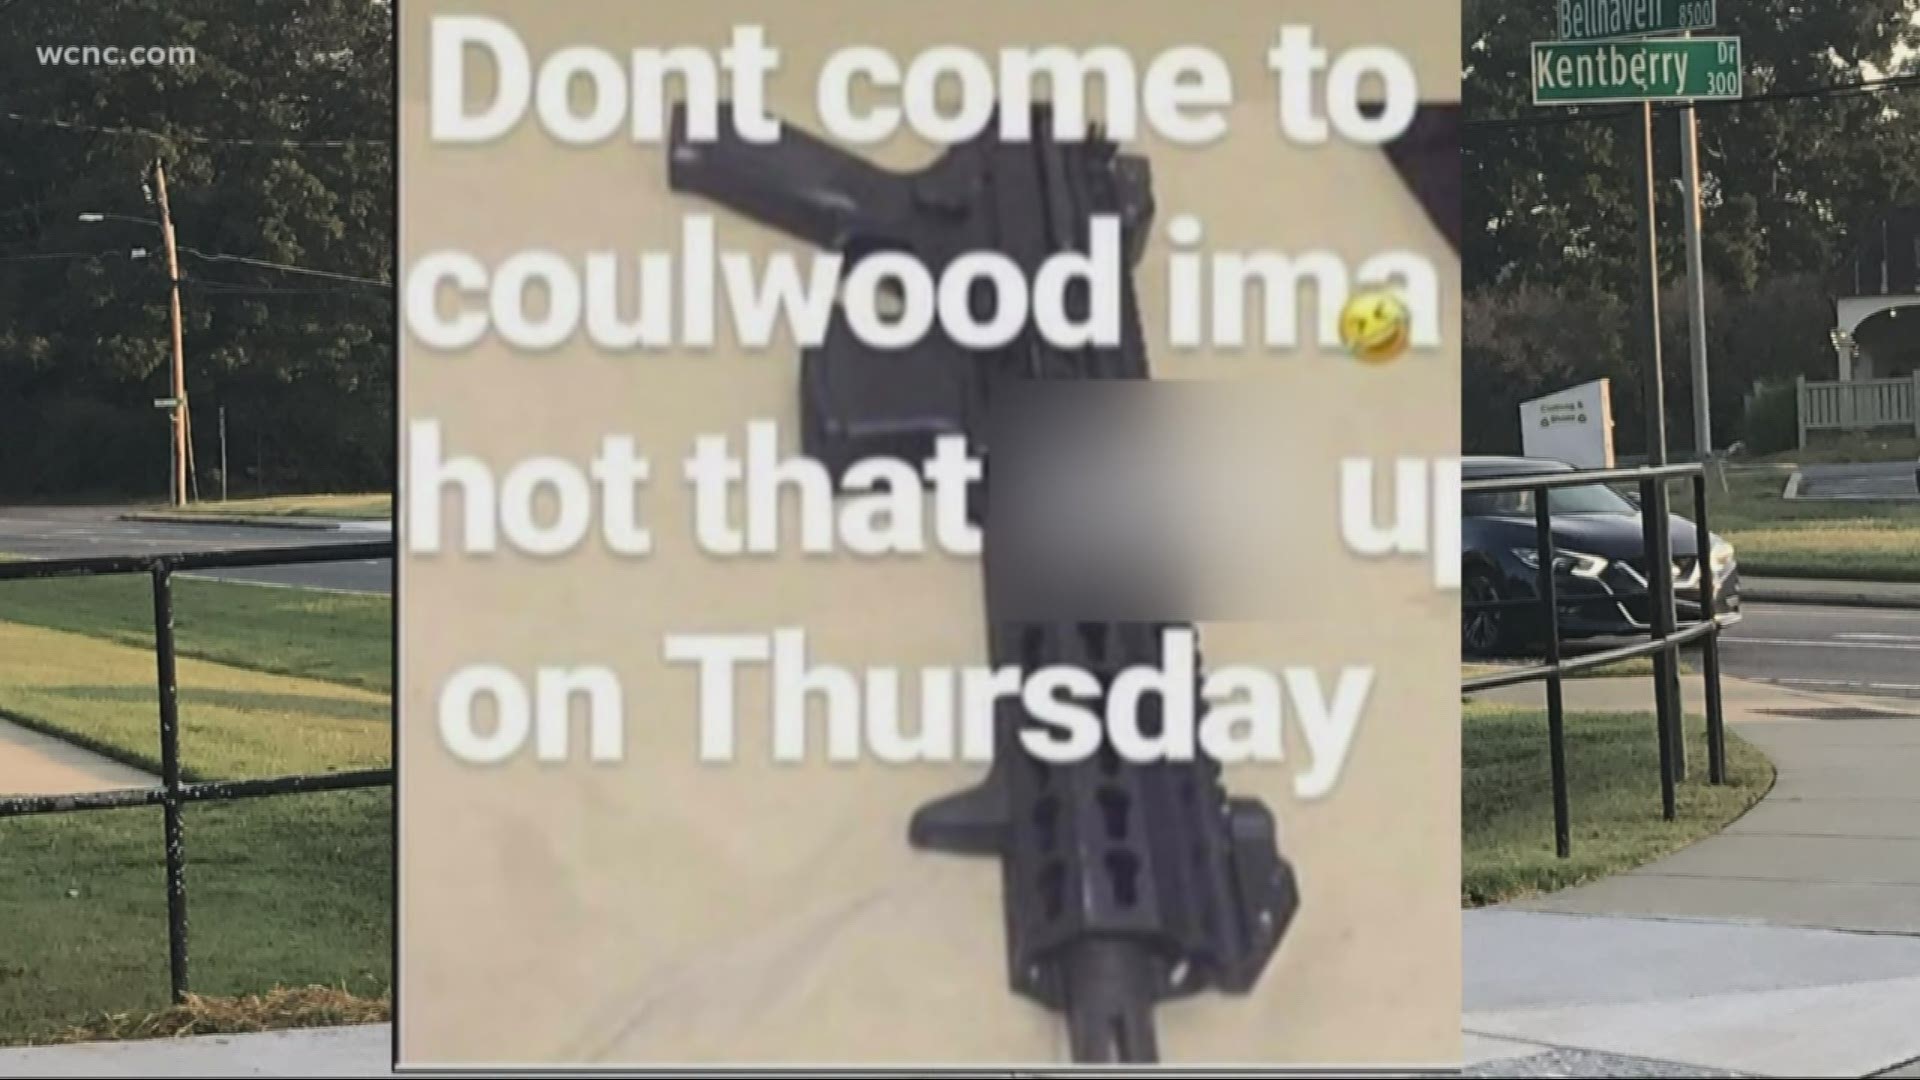 CMPD arrested a 13-year-old overnight after he posted a shooting threat to Coulwood Middle School, he says was just a joke.